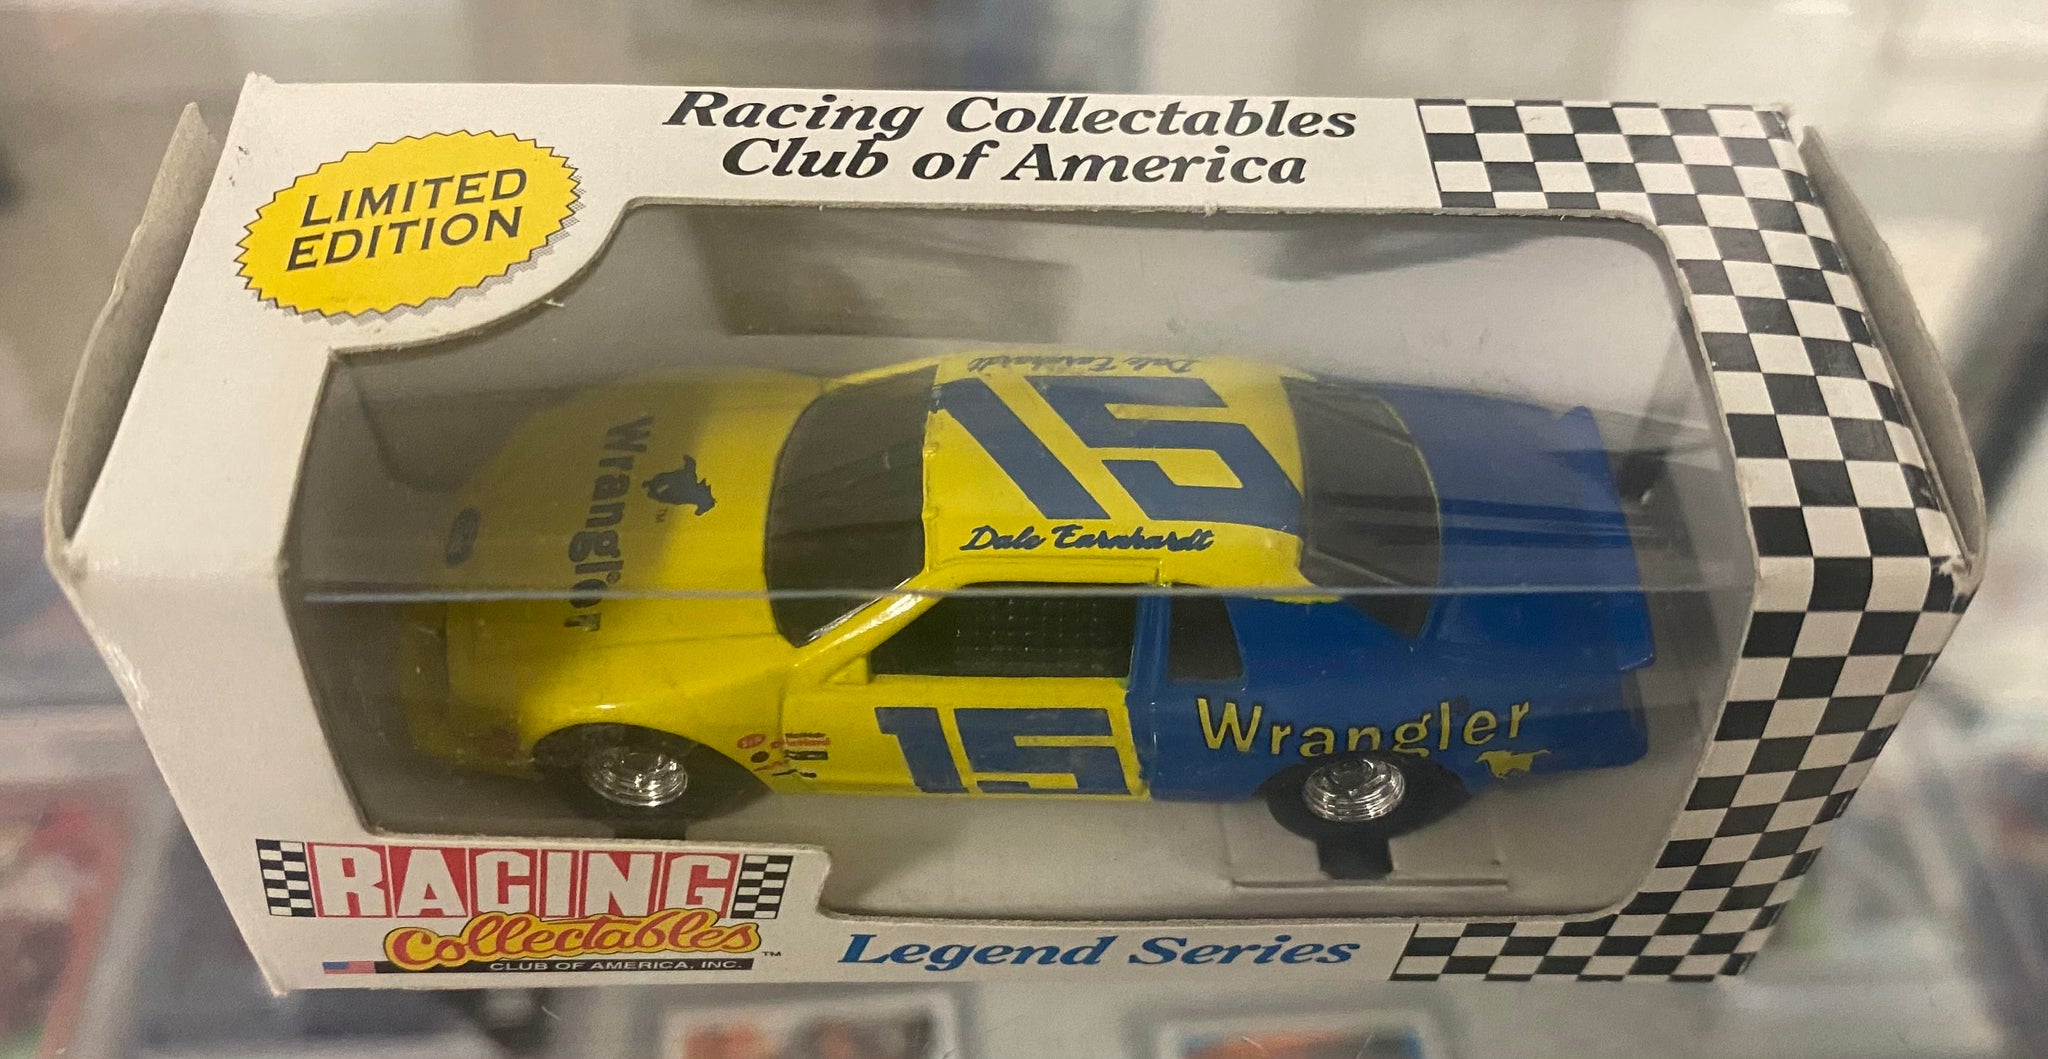 Racing Collectibles Legends Series Dale Earnhardt Mini Diecast Car Limited Edition